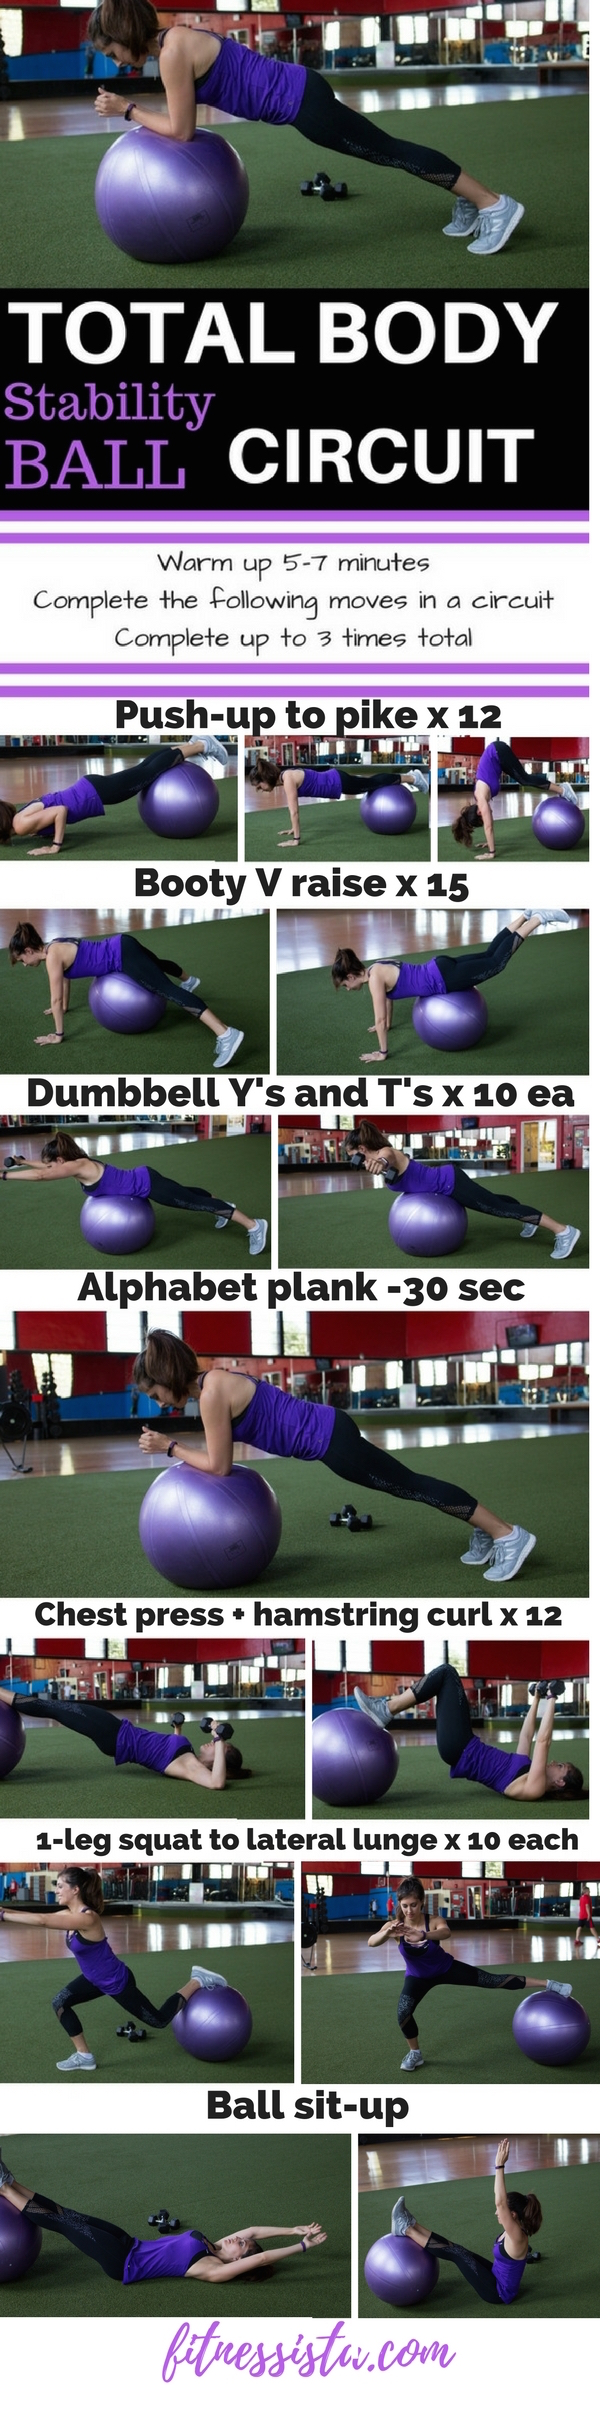 Stability ball total body circuit workout